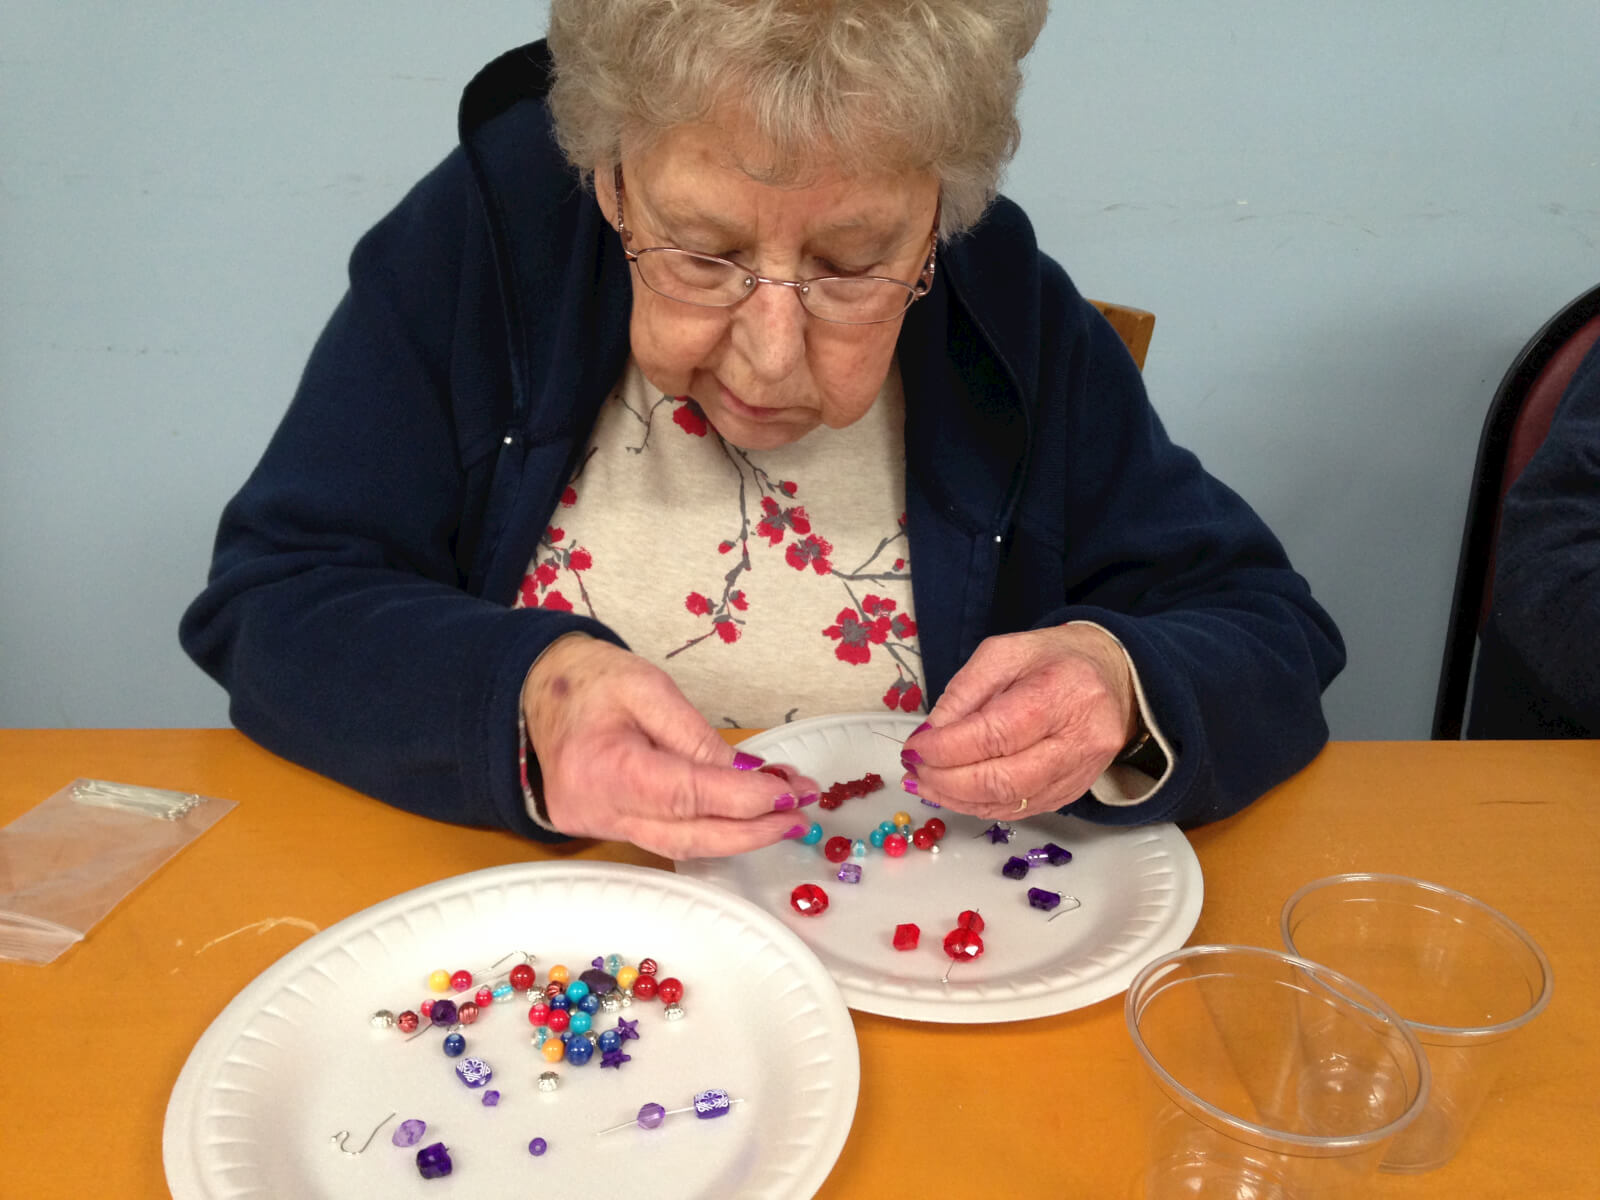 Southfork resident Libby Carter concentrating on threading beads onto the needle